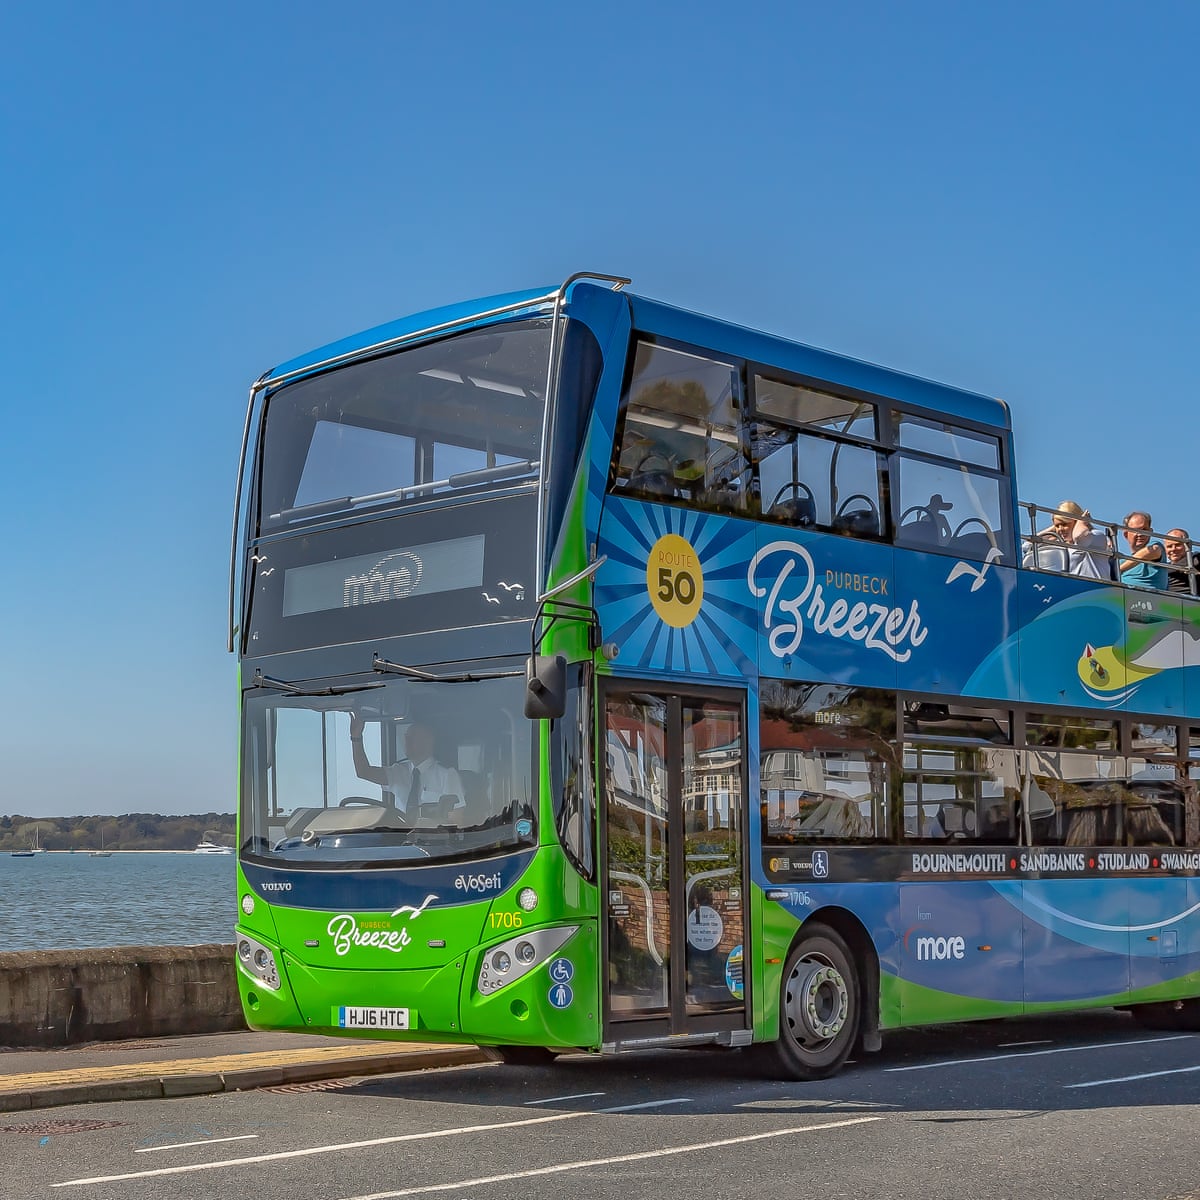 10 of the UK's best open-top bus rides | Day trips | The Guardian